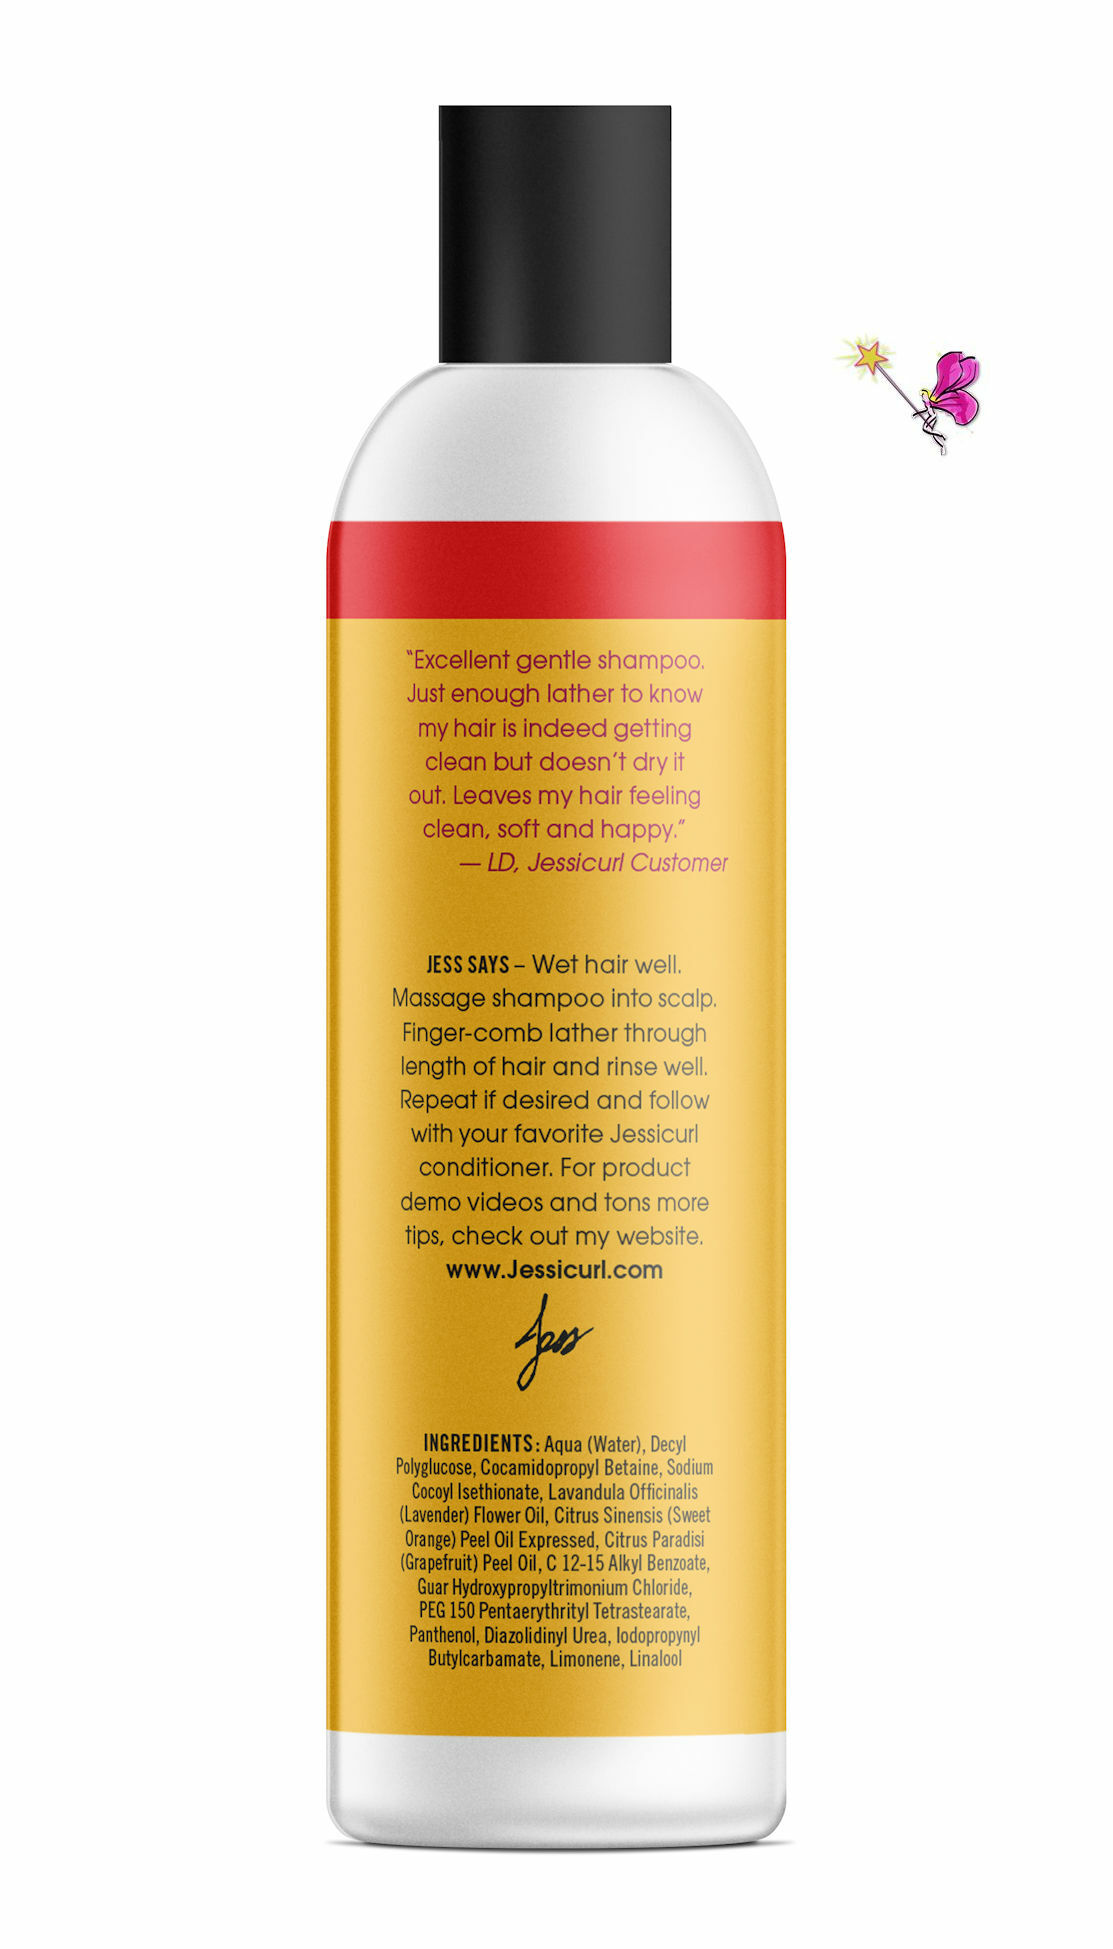 Jessicurl Gentle Lather Shampoo for curls